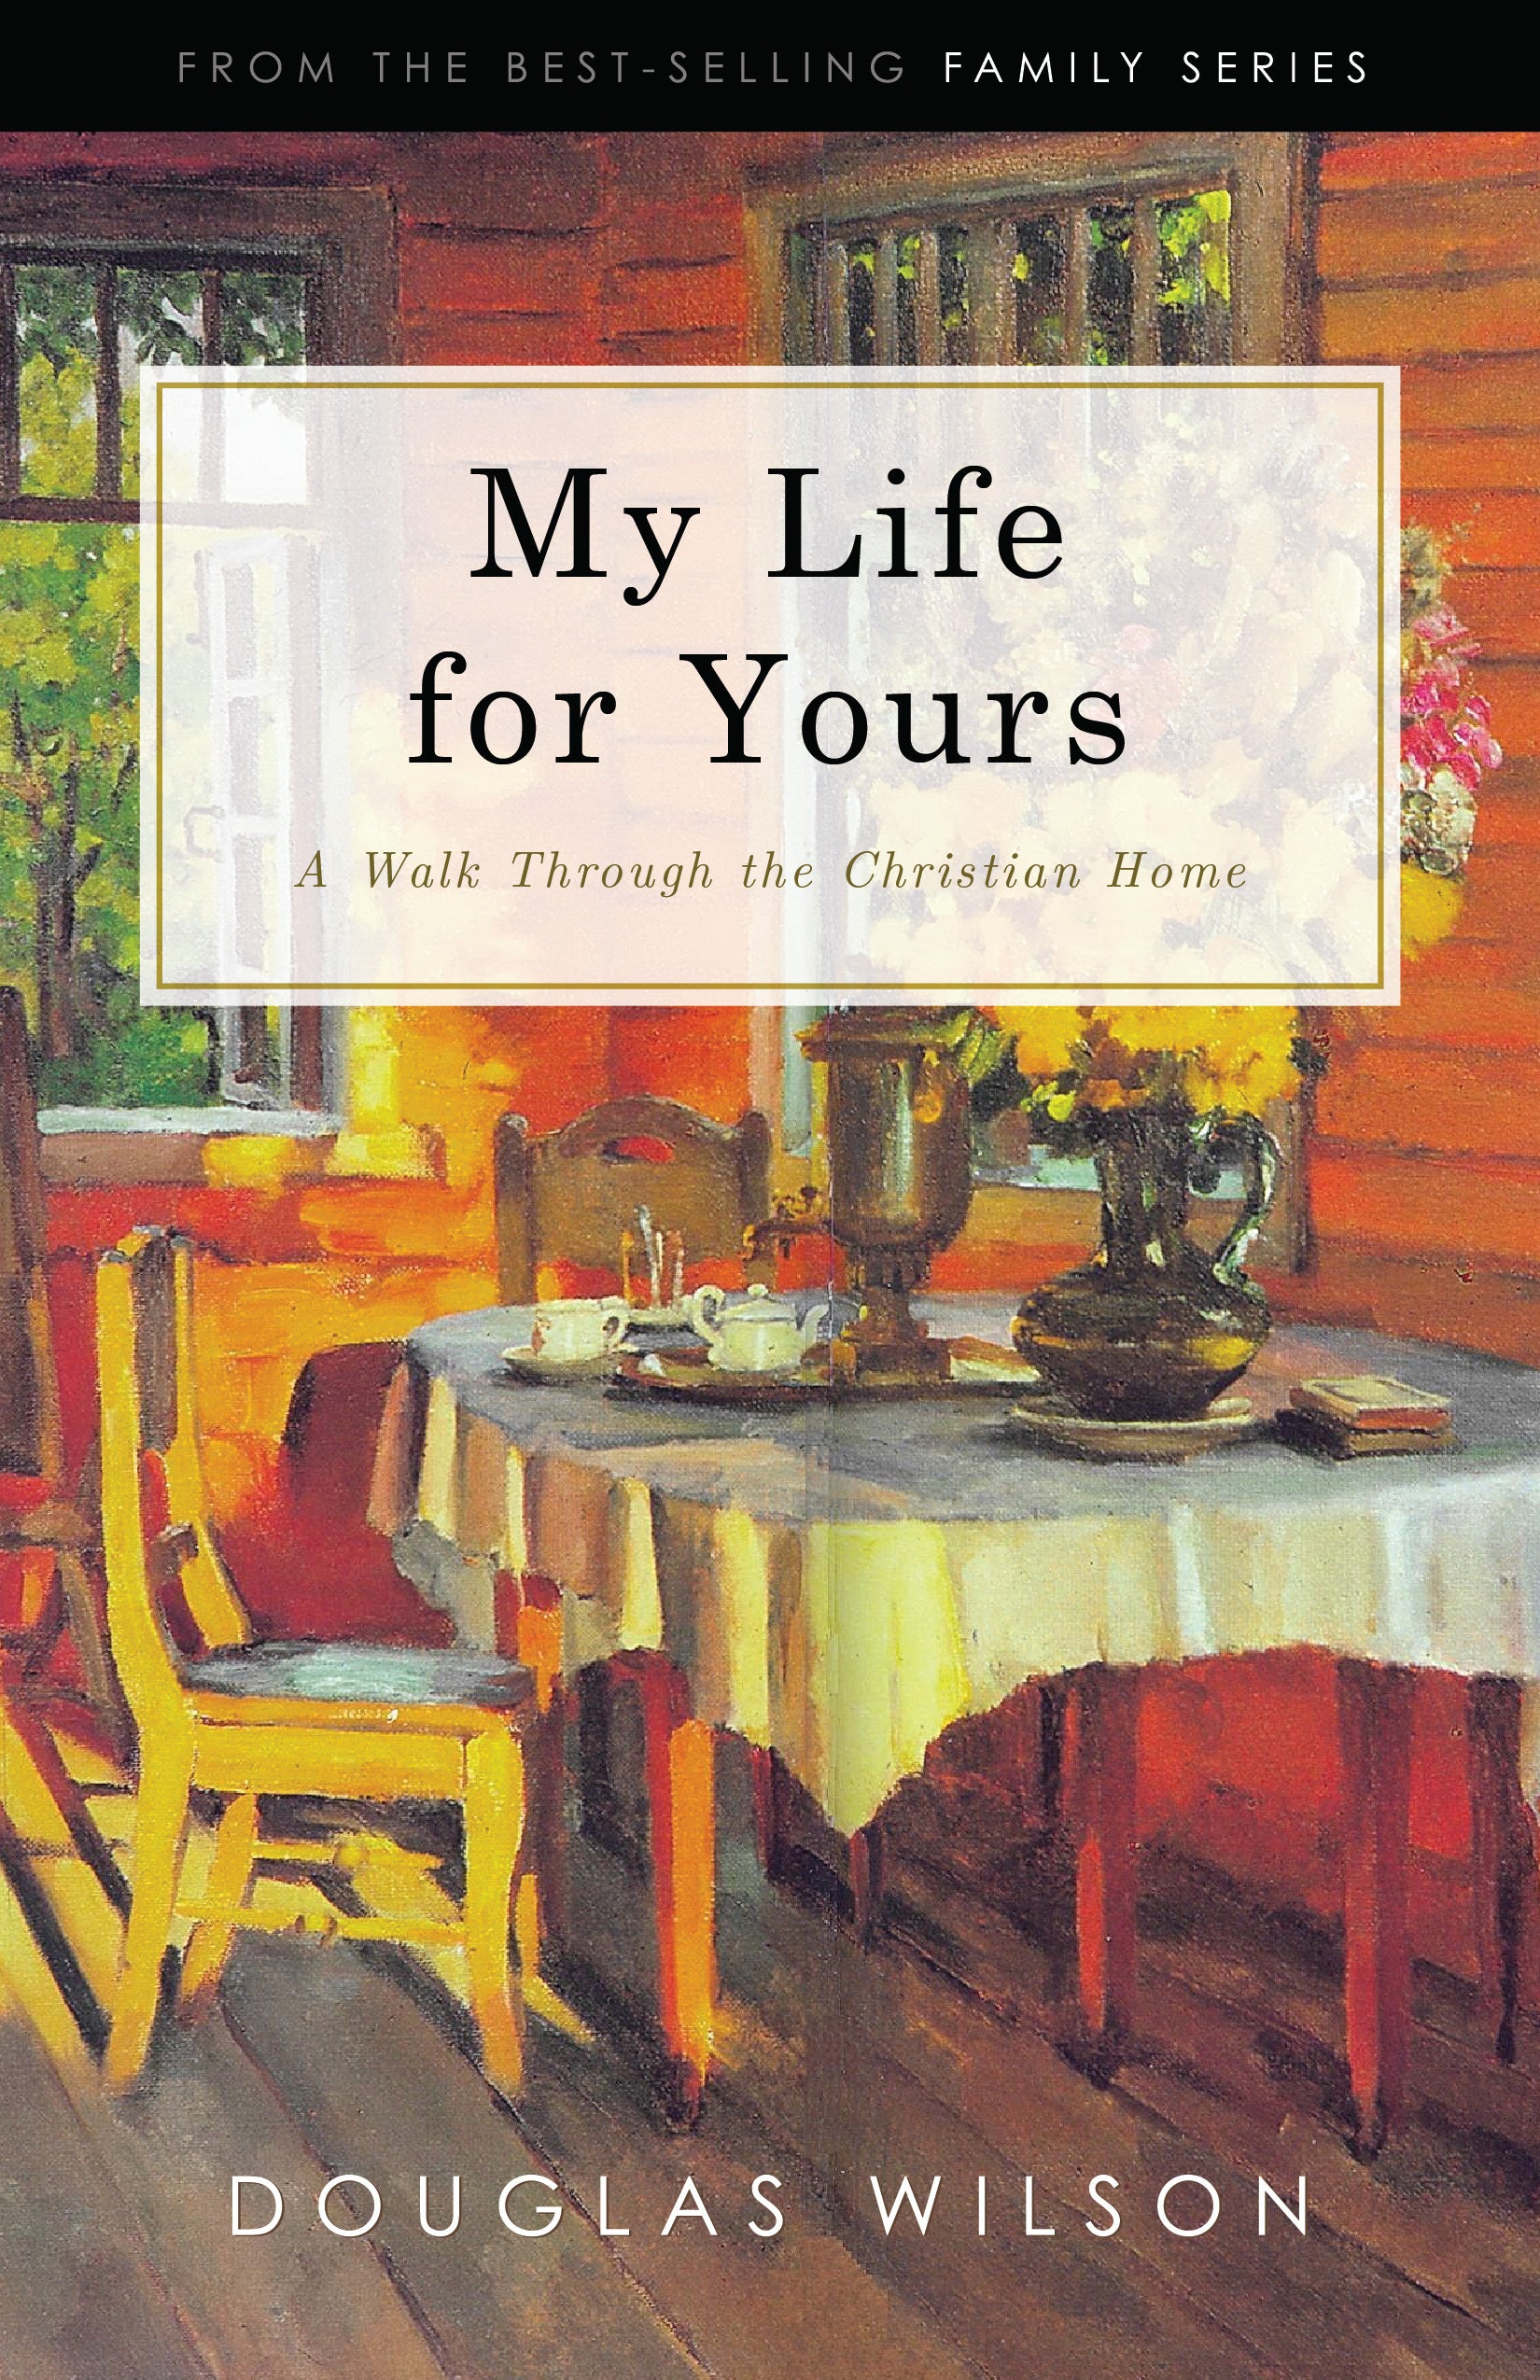 My Life for Yours: A Walk Through the Christian Home